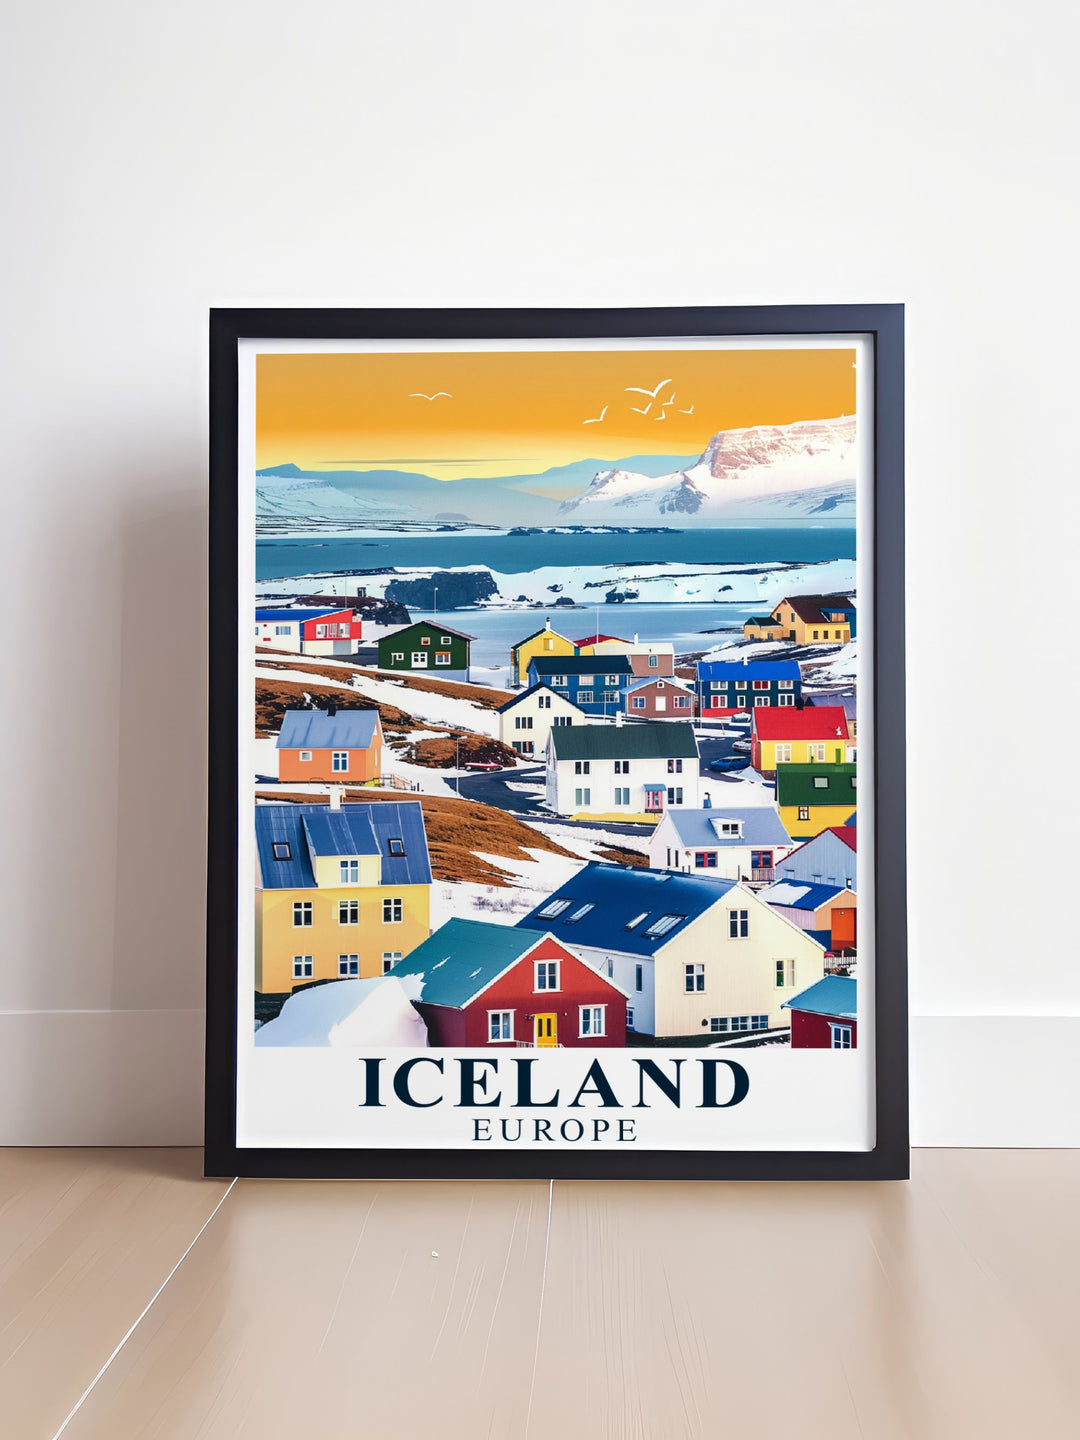 Fine art print capturing the tranquil Blue Lagoon in Iceland, known for its milky blue geothermal waters surrounded by rugged lava fields, offering a serene and relaxing atmosphere.